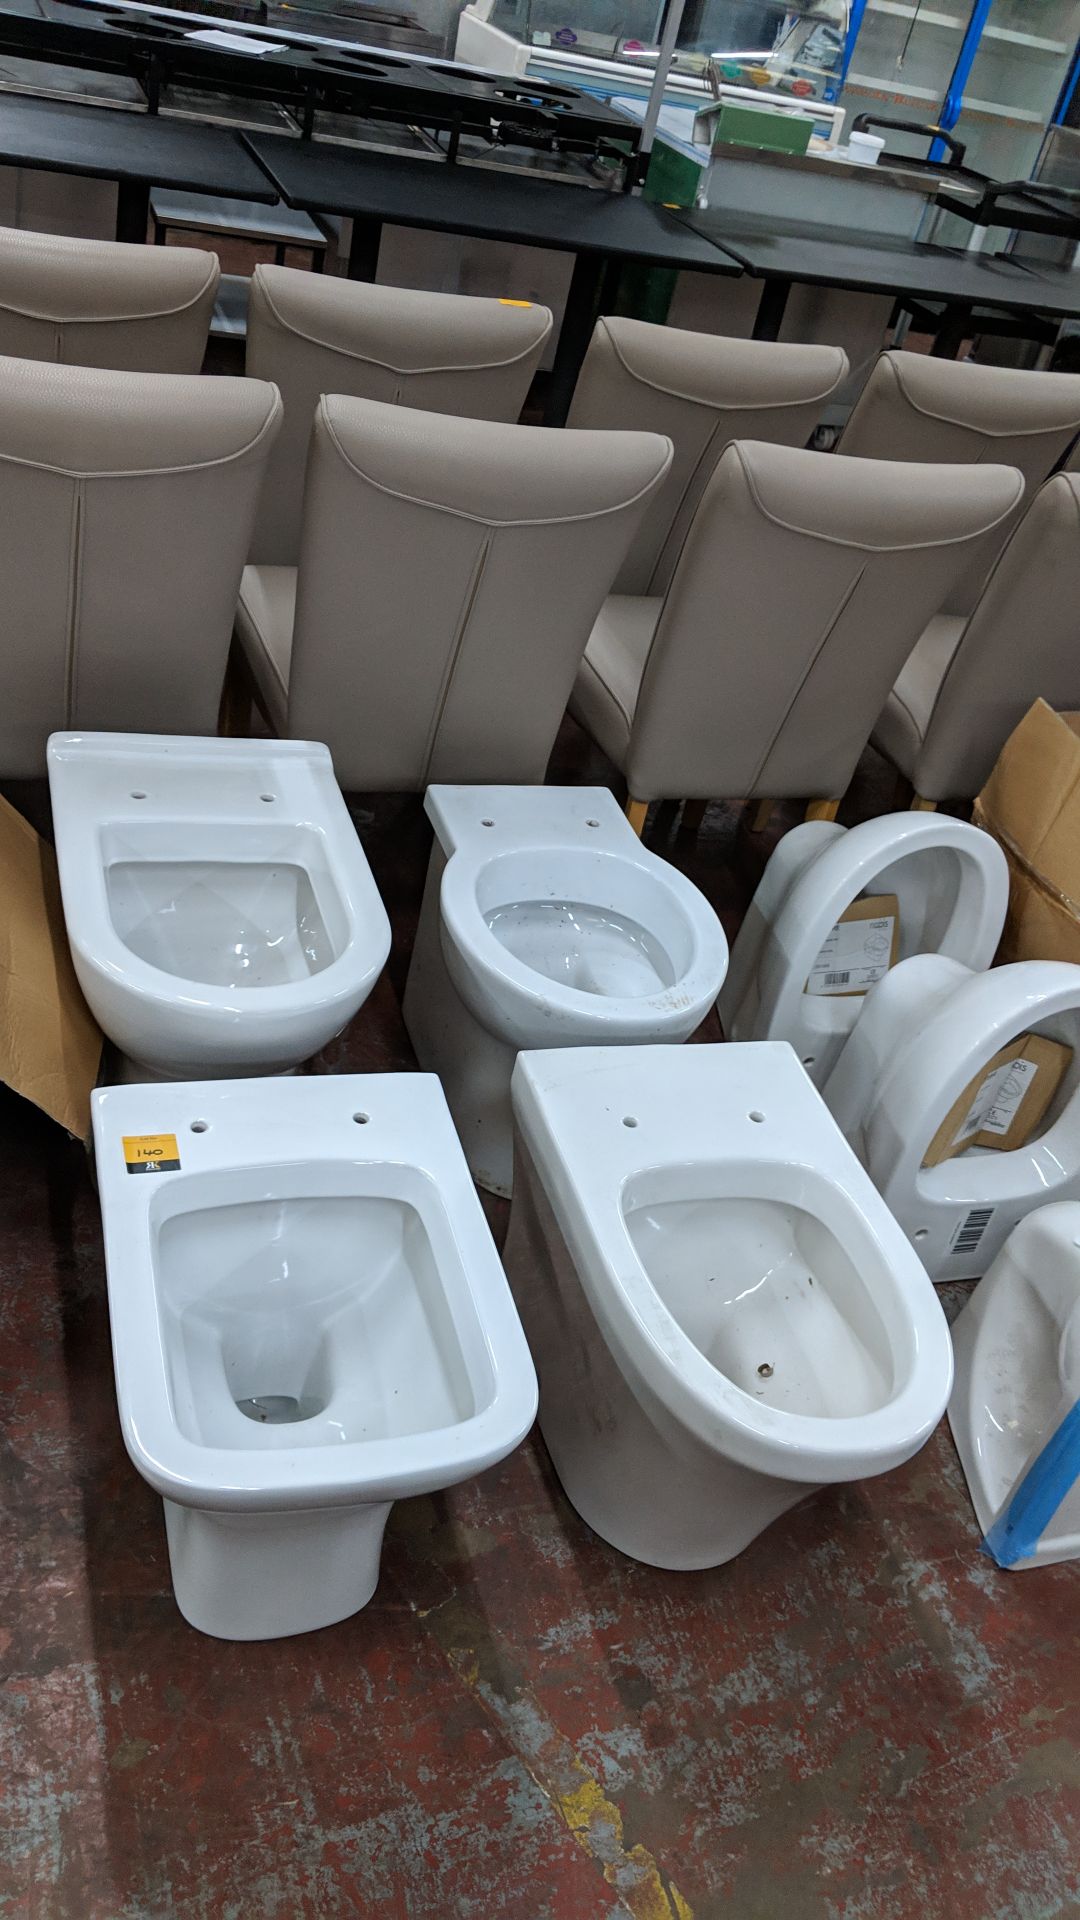 4 off assorted back-to-wall WC pans Lots 100 - 142 & 146 - 167 are being sold on behalf of a - Image 7 of 7